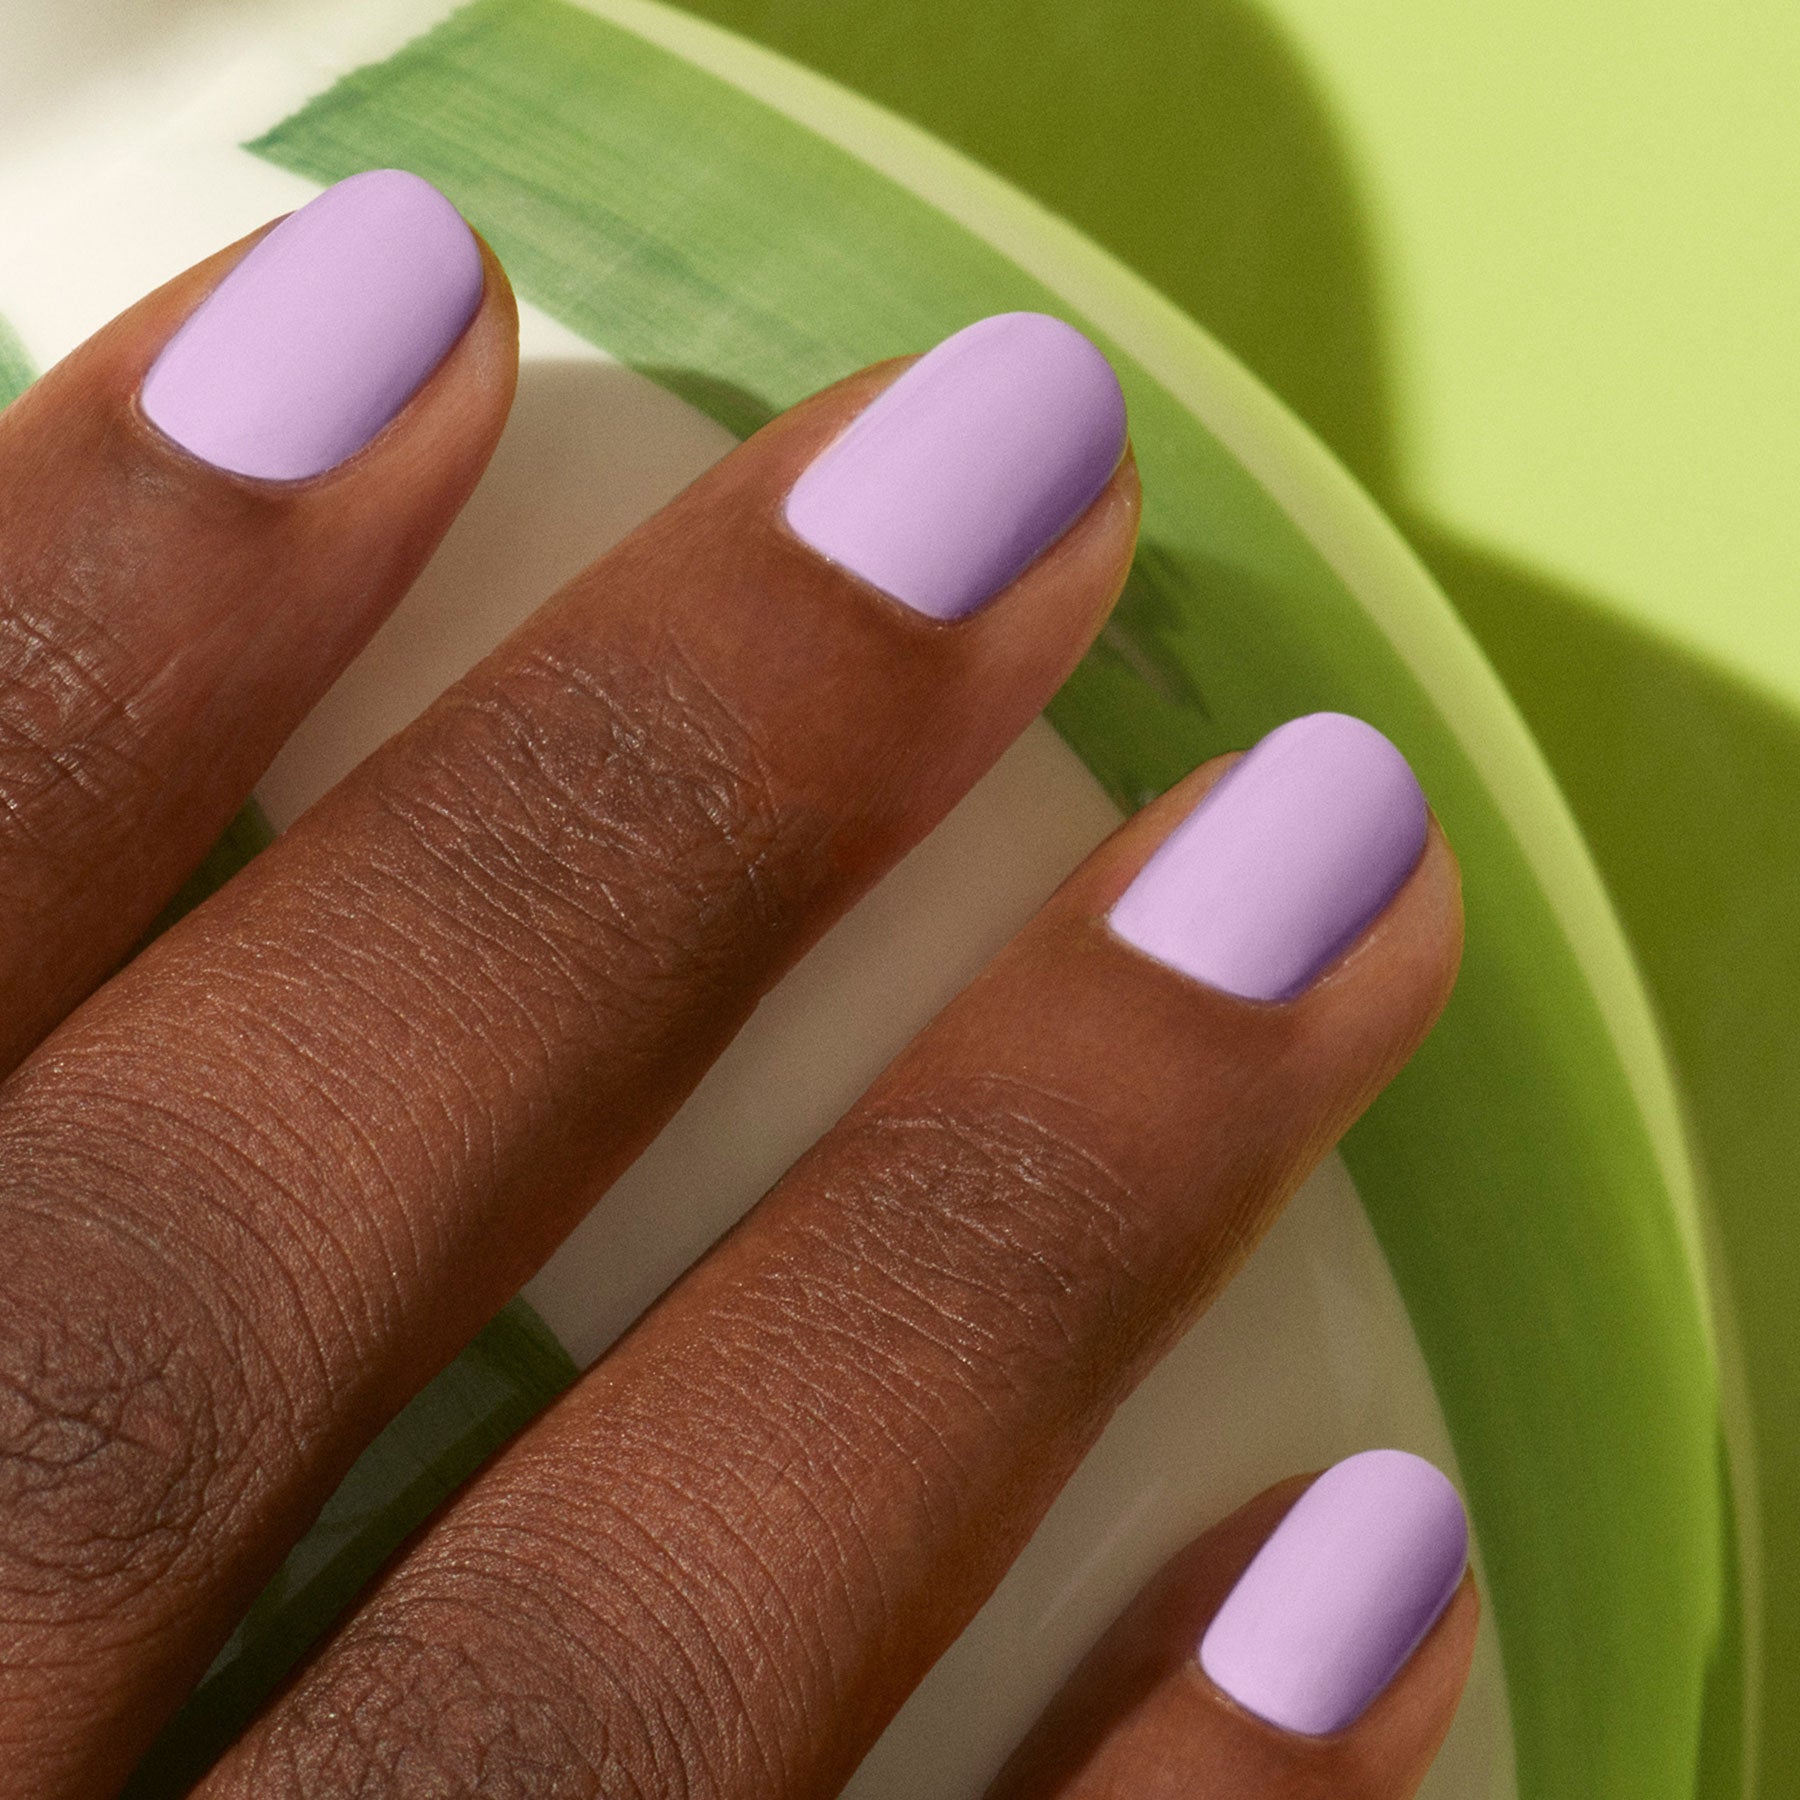 The 'Digital Lavender' Nail Trend Is The New Nostalgic Manicure To Try |  BEAUTY/crew